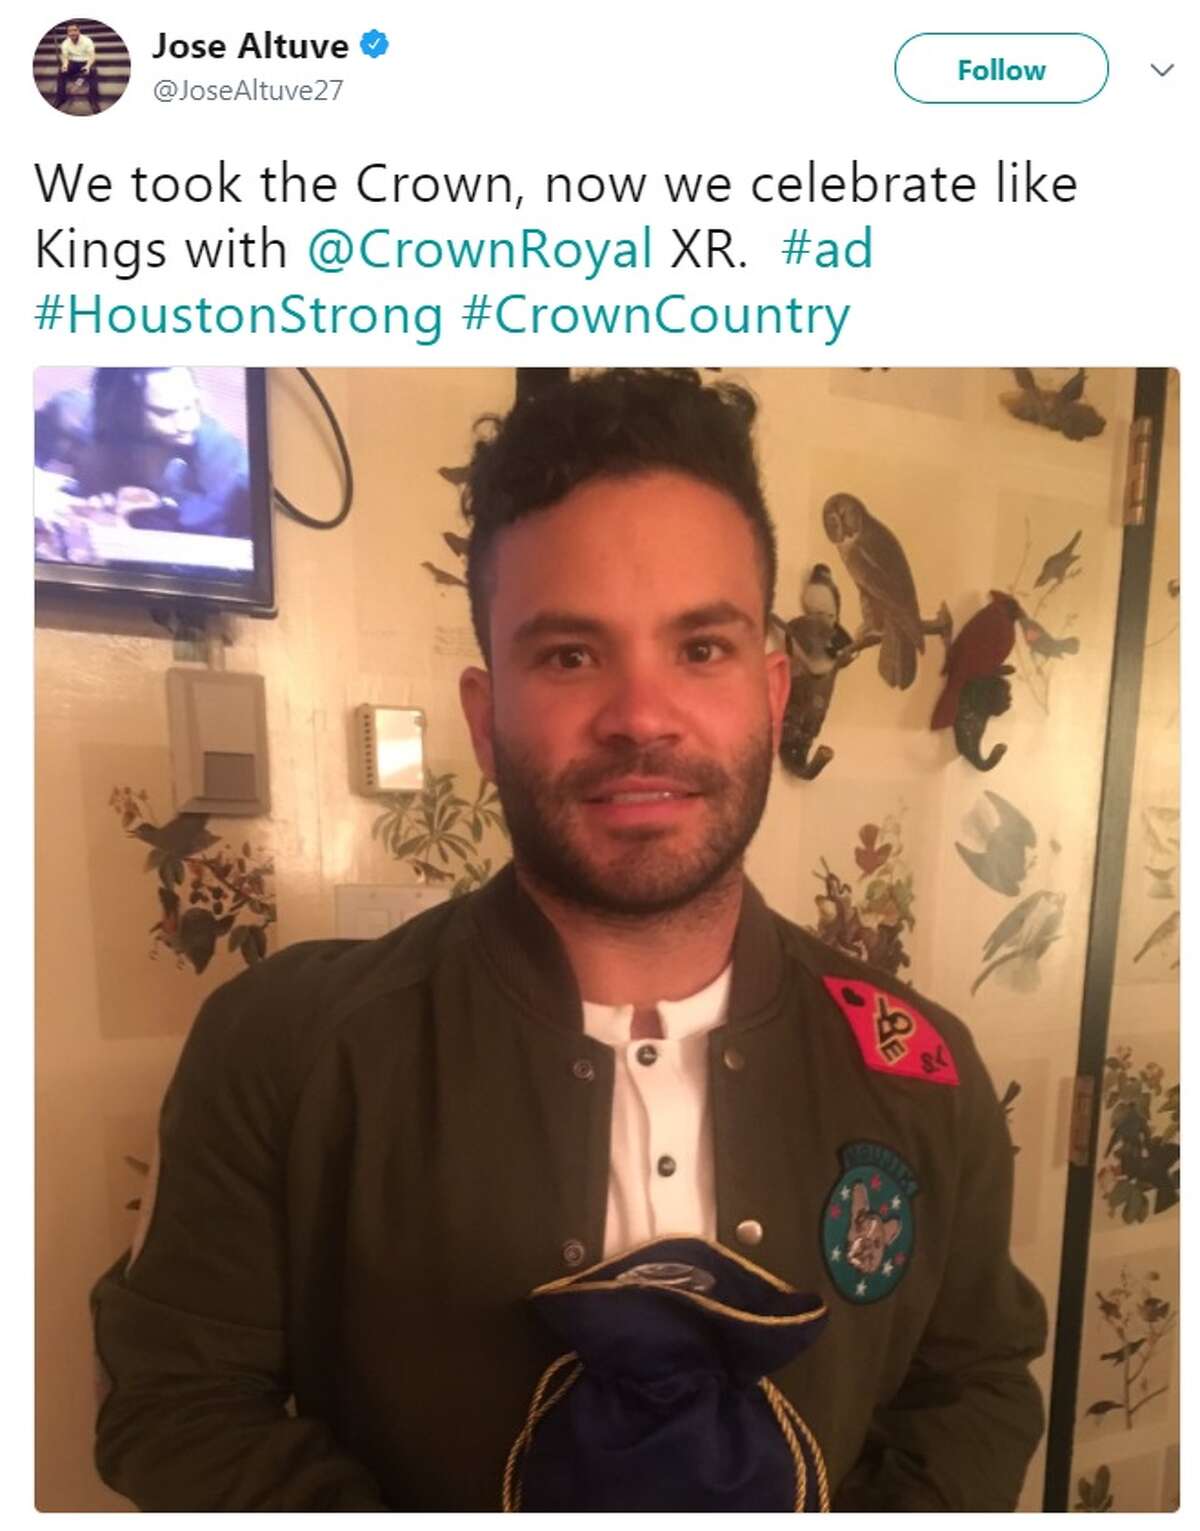 Jose Altuve shares his affection for Crown Royal whiskey with